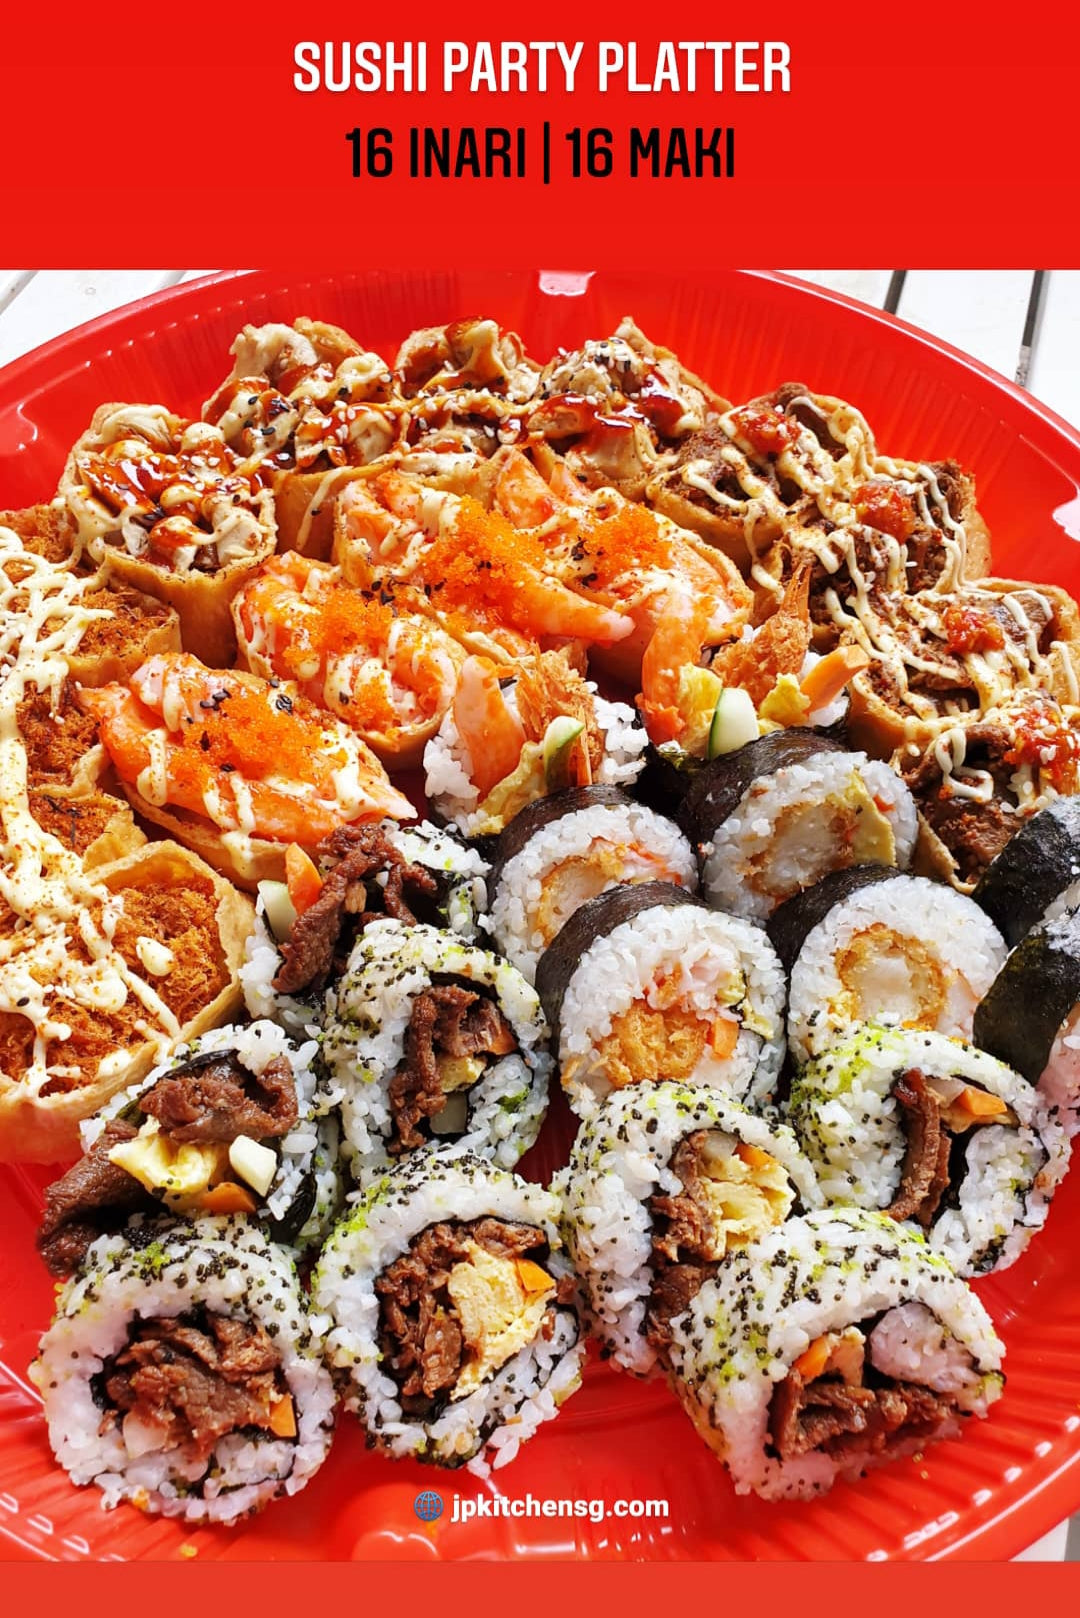 SUSHI PARTY PLATTER (32pc)